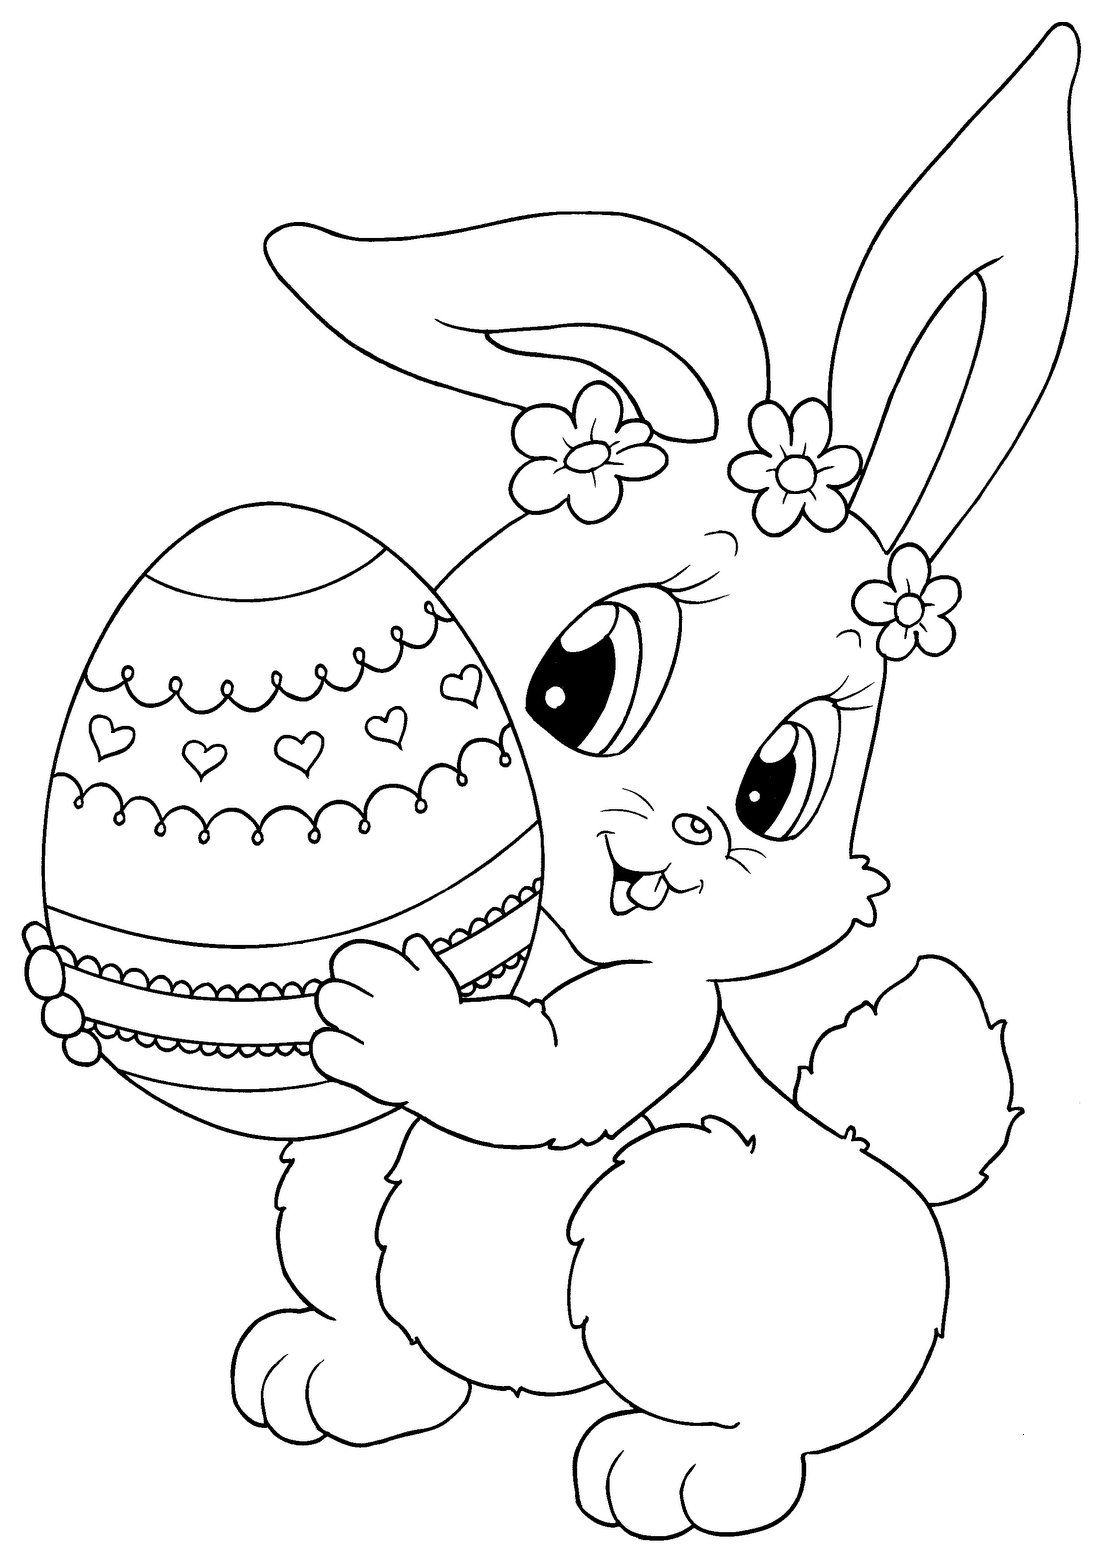 Pin by Vita Gorbacheva on Pascoa/Coelhos | Bunny coloring pages, Easter  bunny colouring, Easter printables free